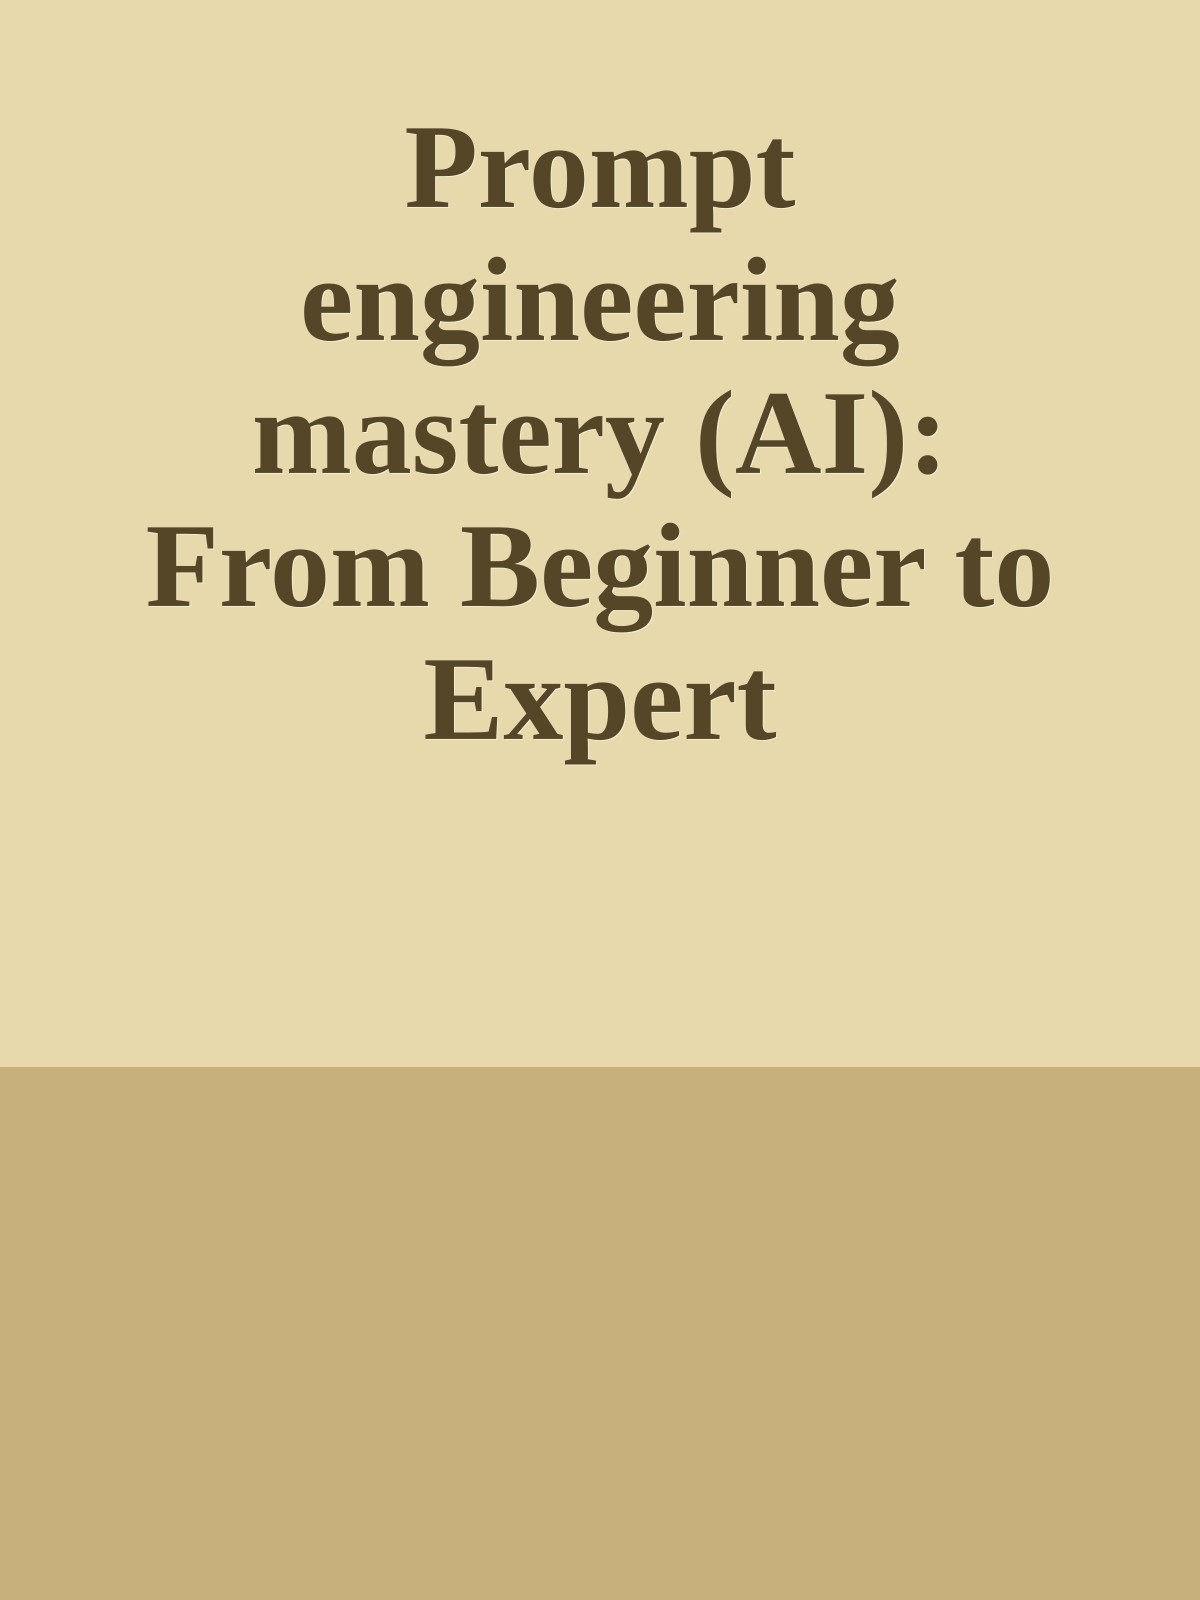 Prompt engineering mastery (AI): From Beginner to Expert